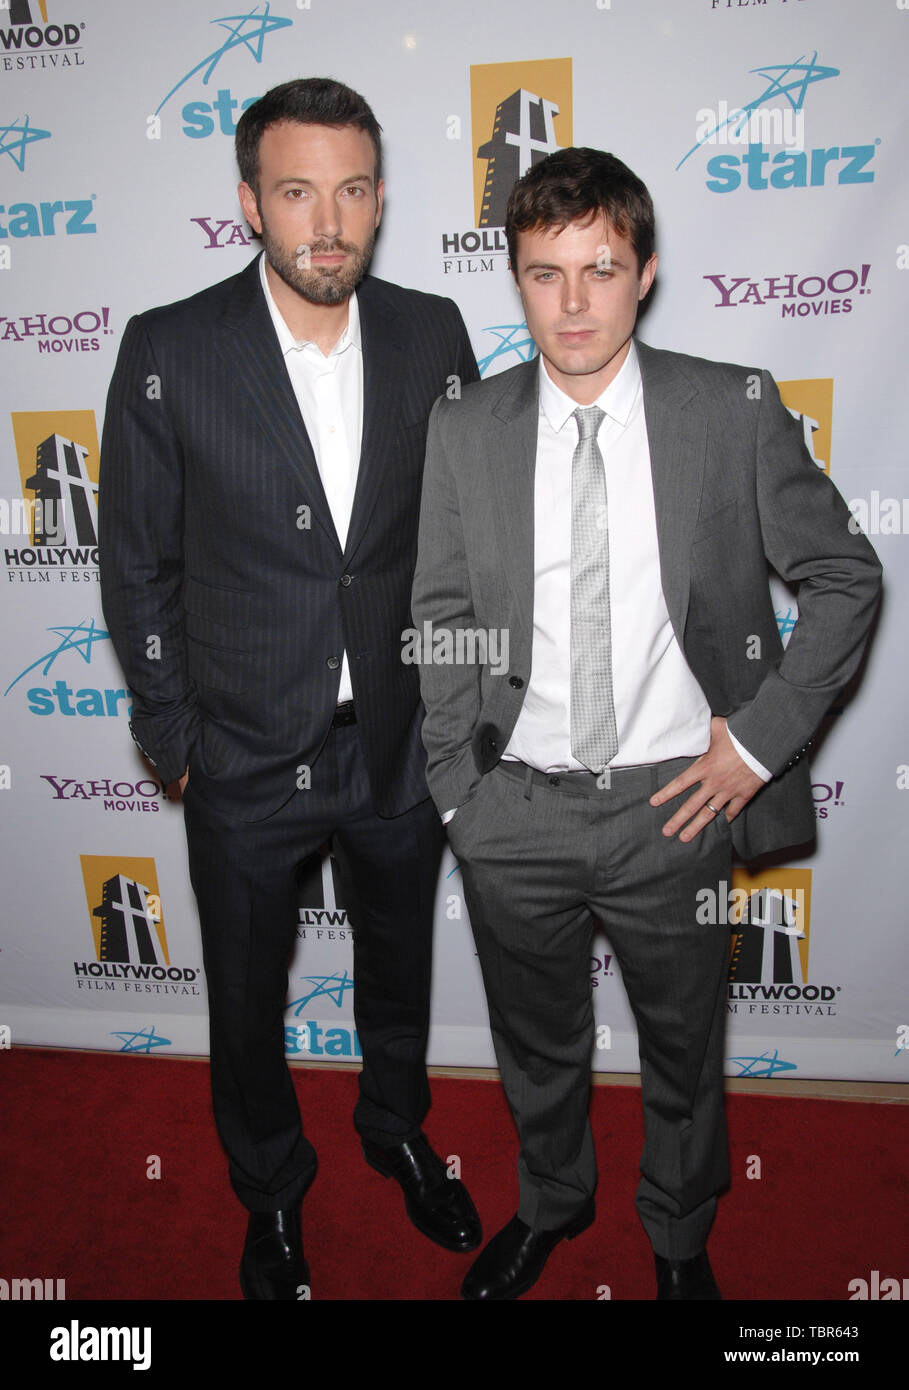 LOS ANGELES, CA. October 23, 2007: Ben Affleck (left) & Casey Affleck at the Hollywood Film Festival's 11th Annual Hollywood Awards at the Beverly Hilton Hotel. © 2007 Paul Smith / Featureflash Stock Photo